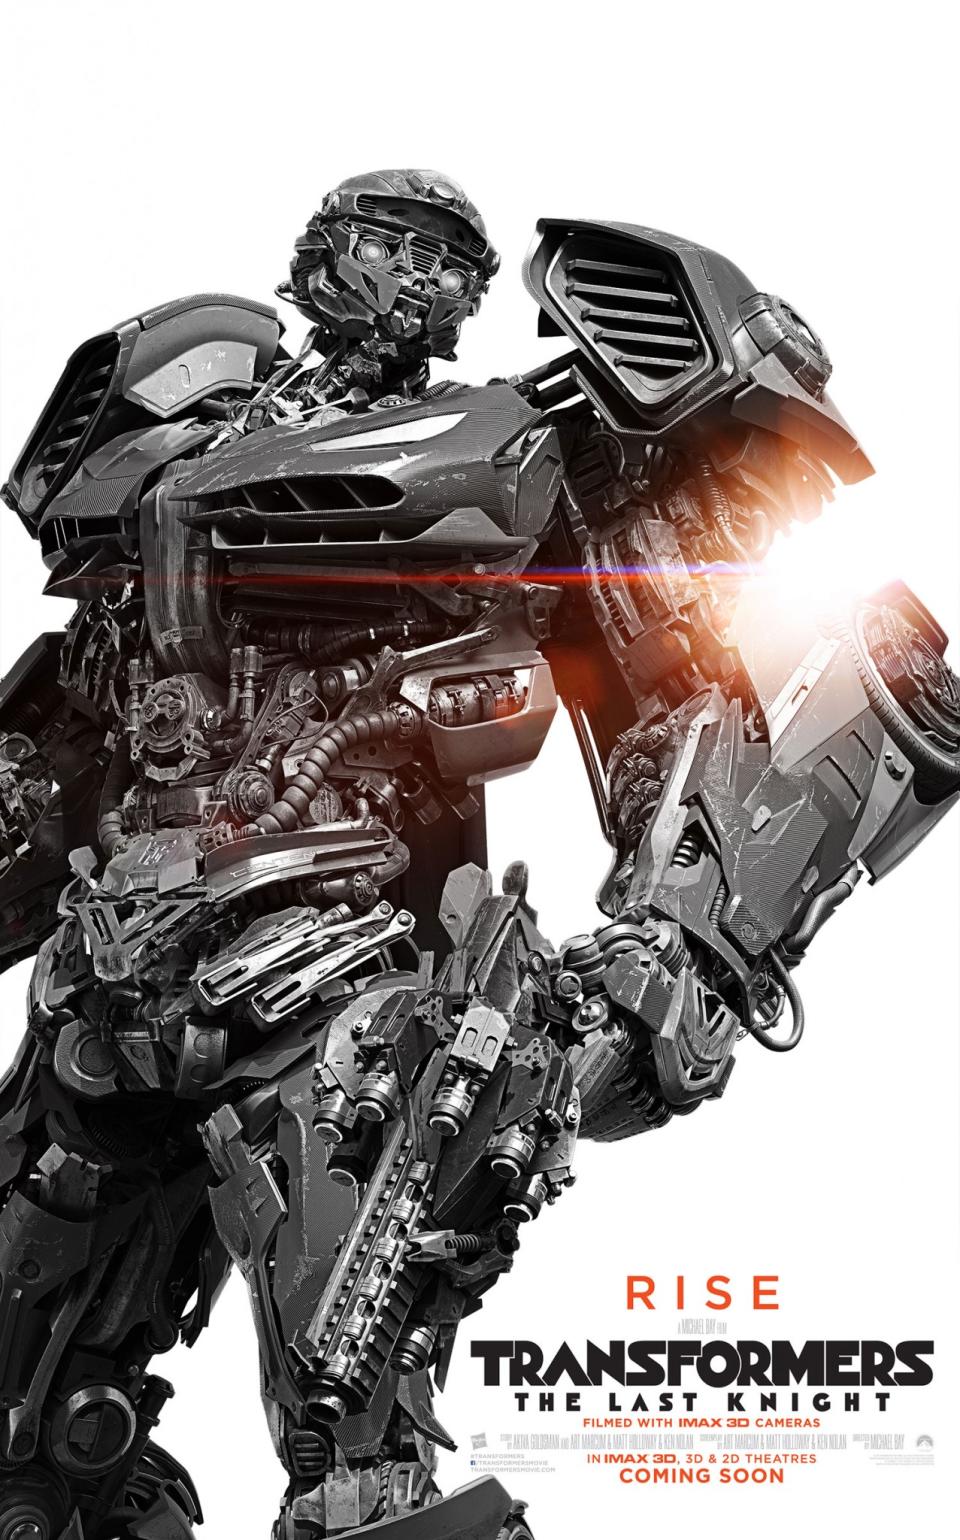 ‘Transformers: The Last Knight’ Hot Rod poster